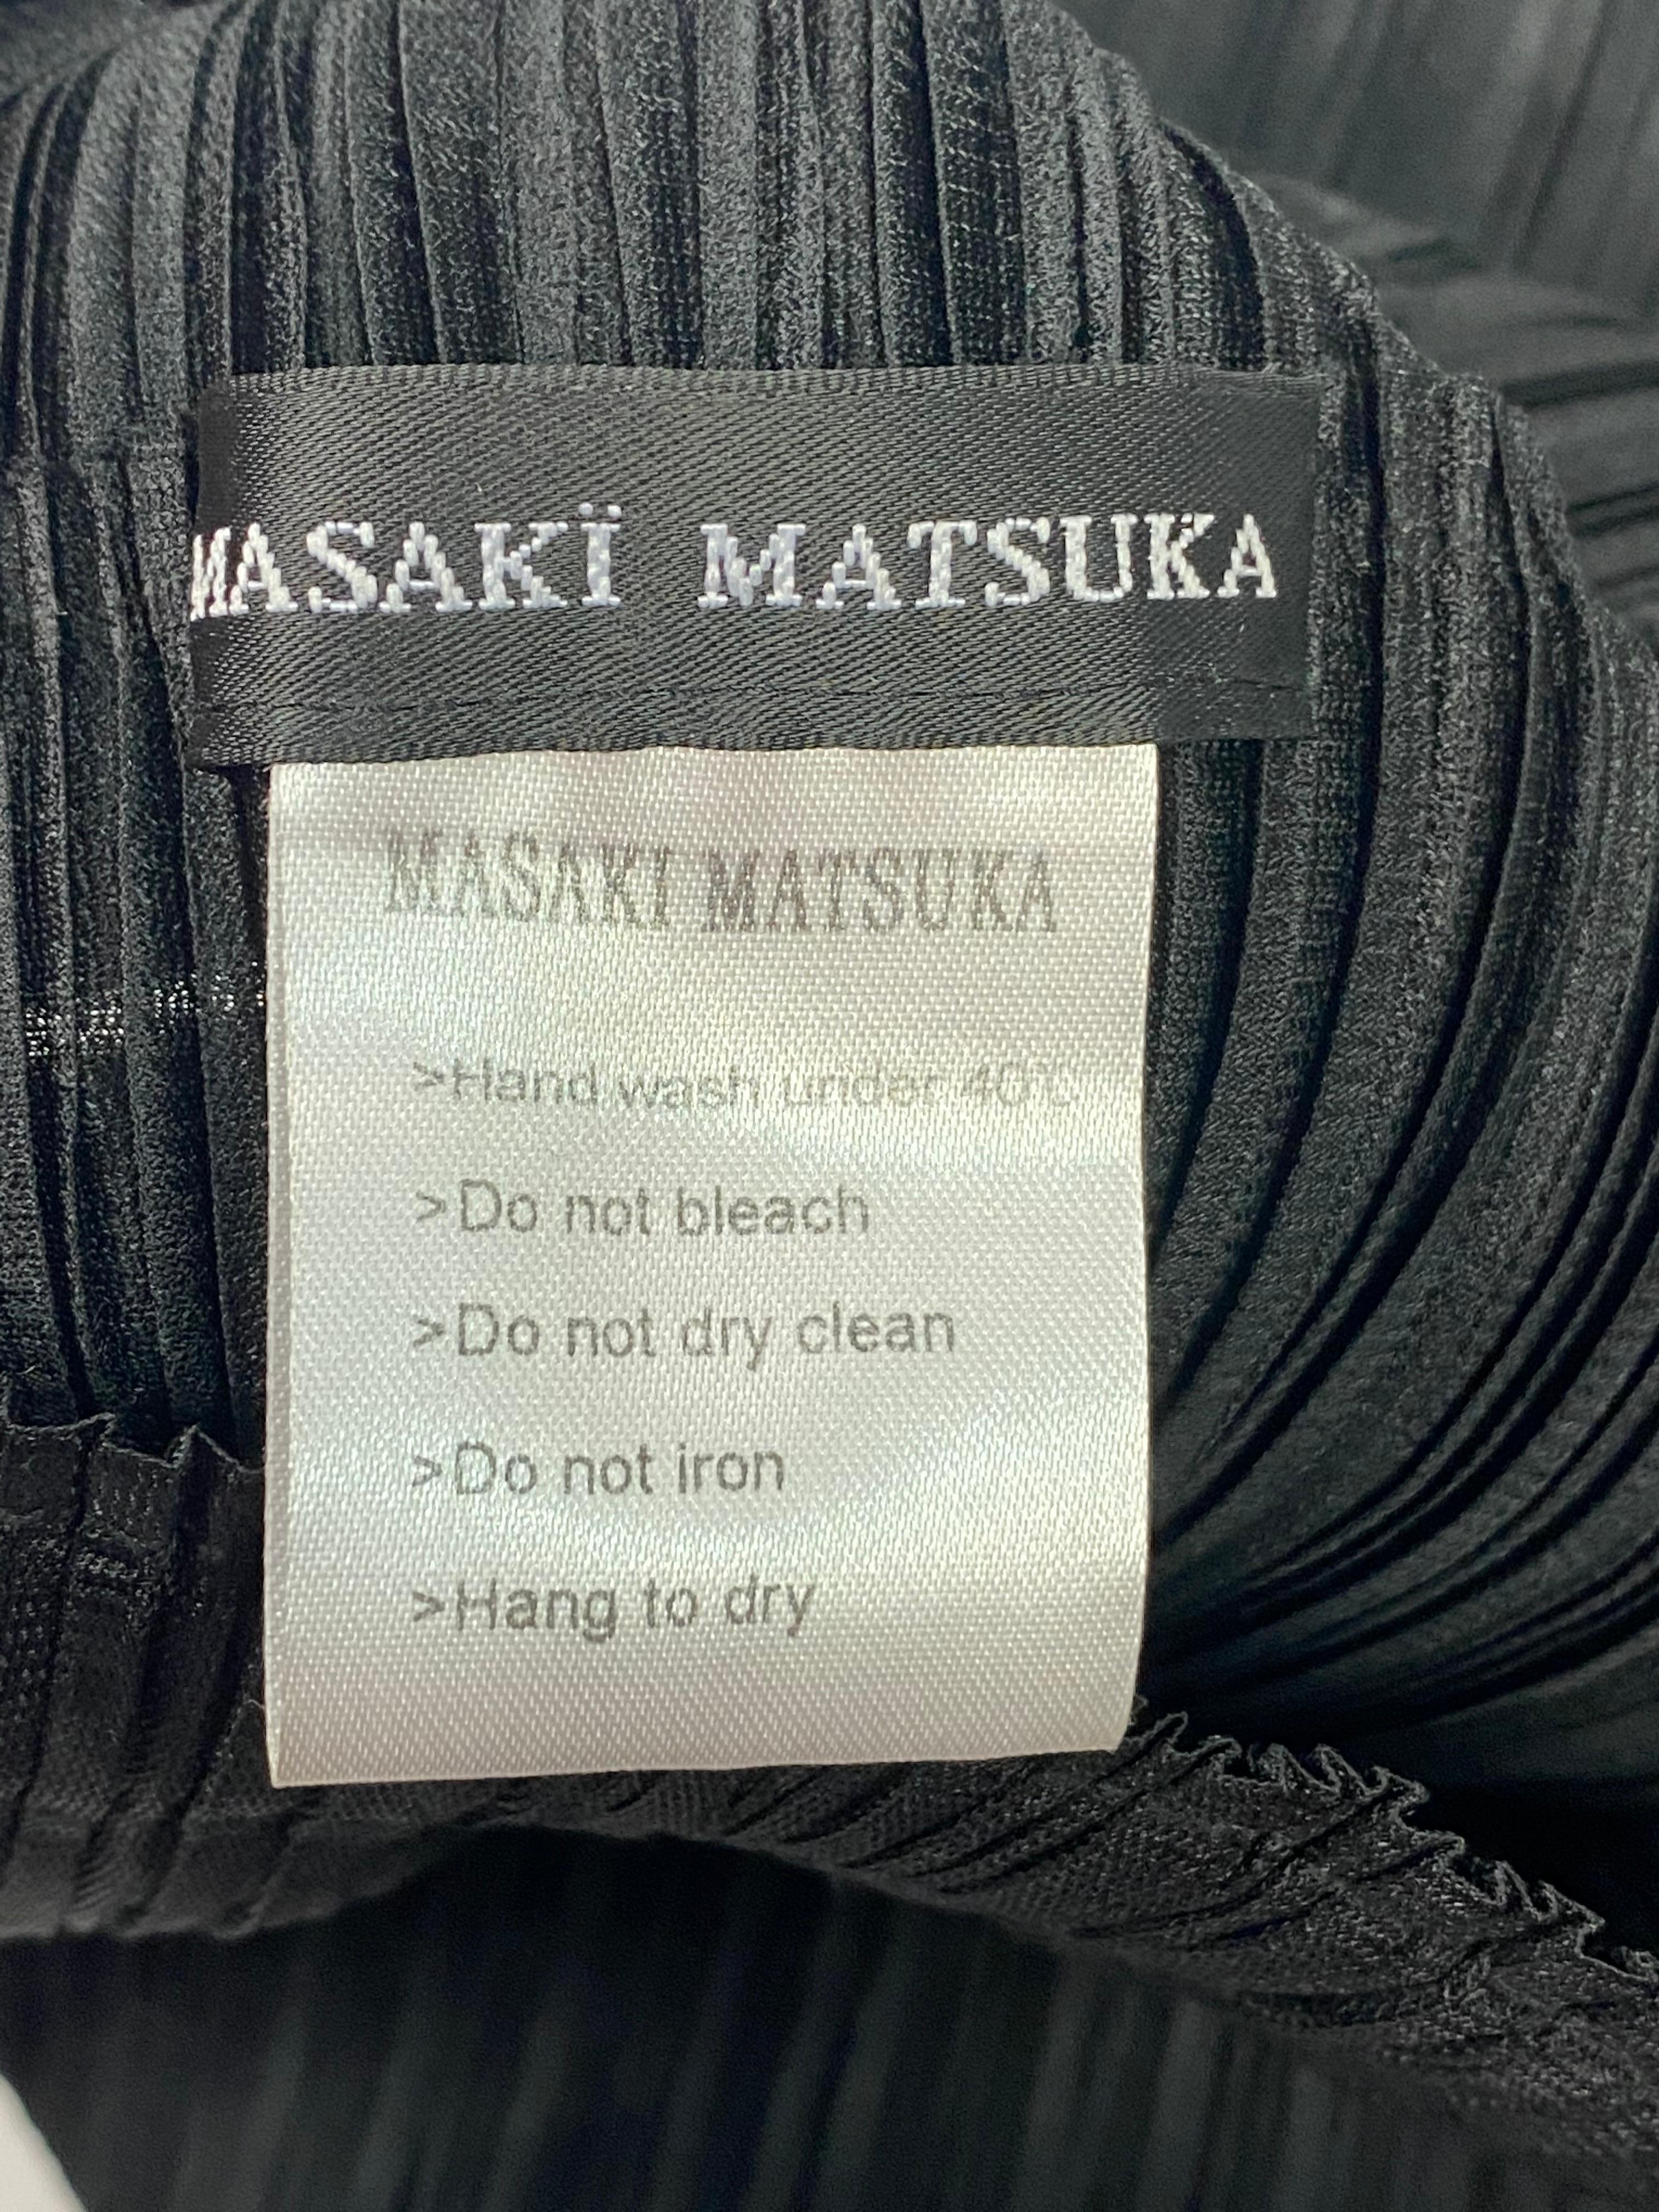 Masaki Matsuka Black Pleated Short Pants In Excellent Condition For Sale In Beverly Hills, CA